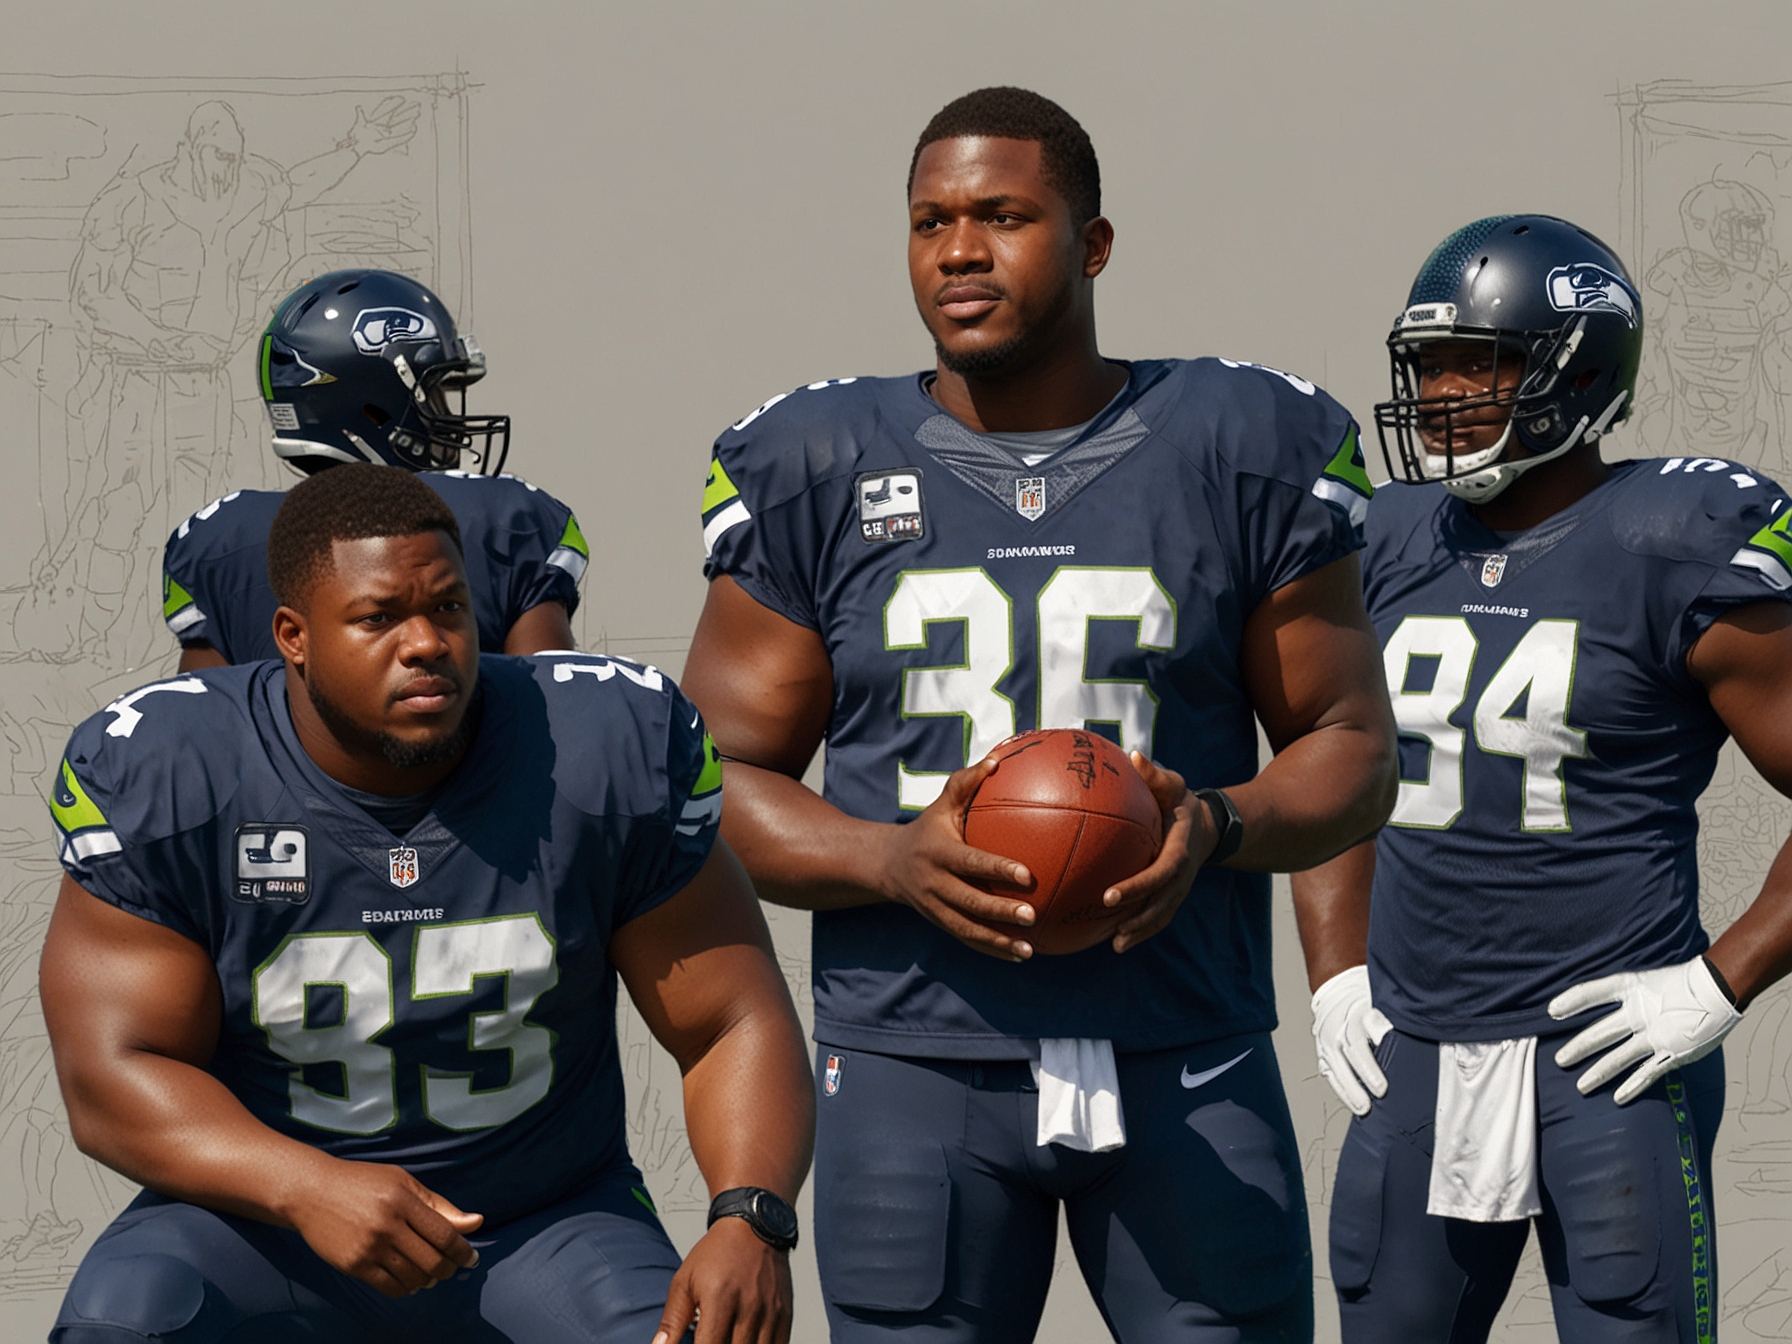 Laken Tomlinson, in his Seahawks uniform, instructing younger teammates during a practice session, embodying his leadership role on the team's offensive line.